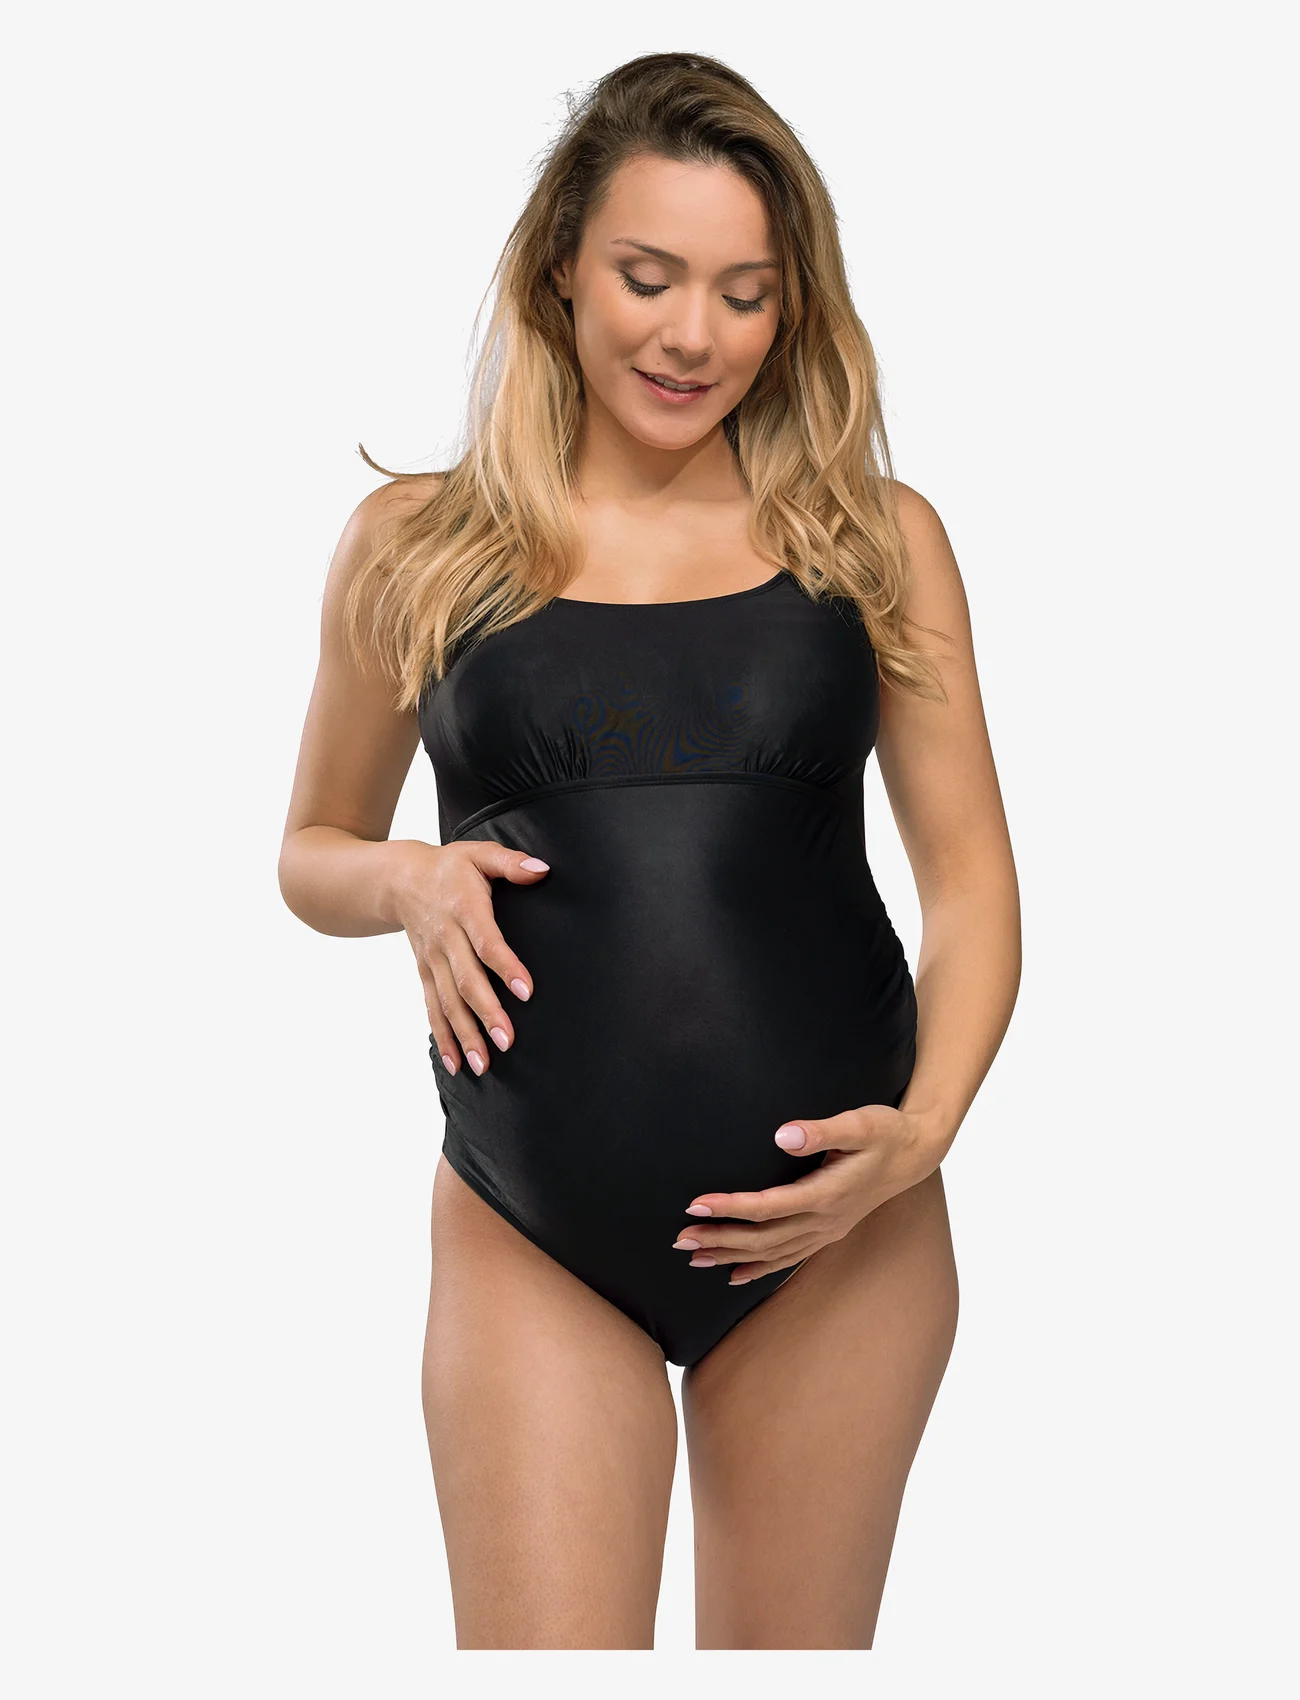 Carriwell - 4802 - swimsuits - black - 0